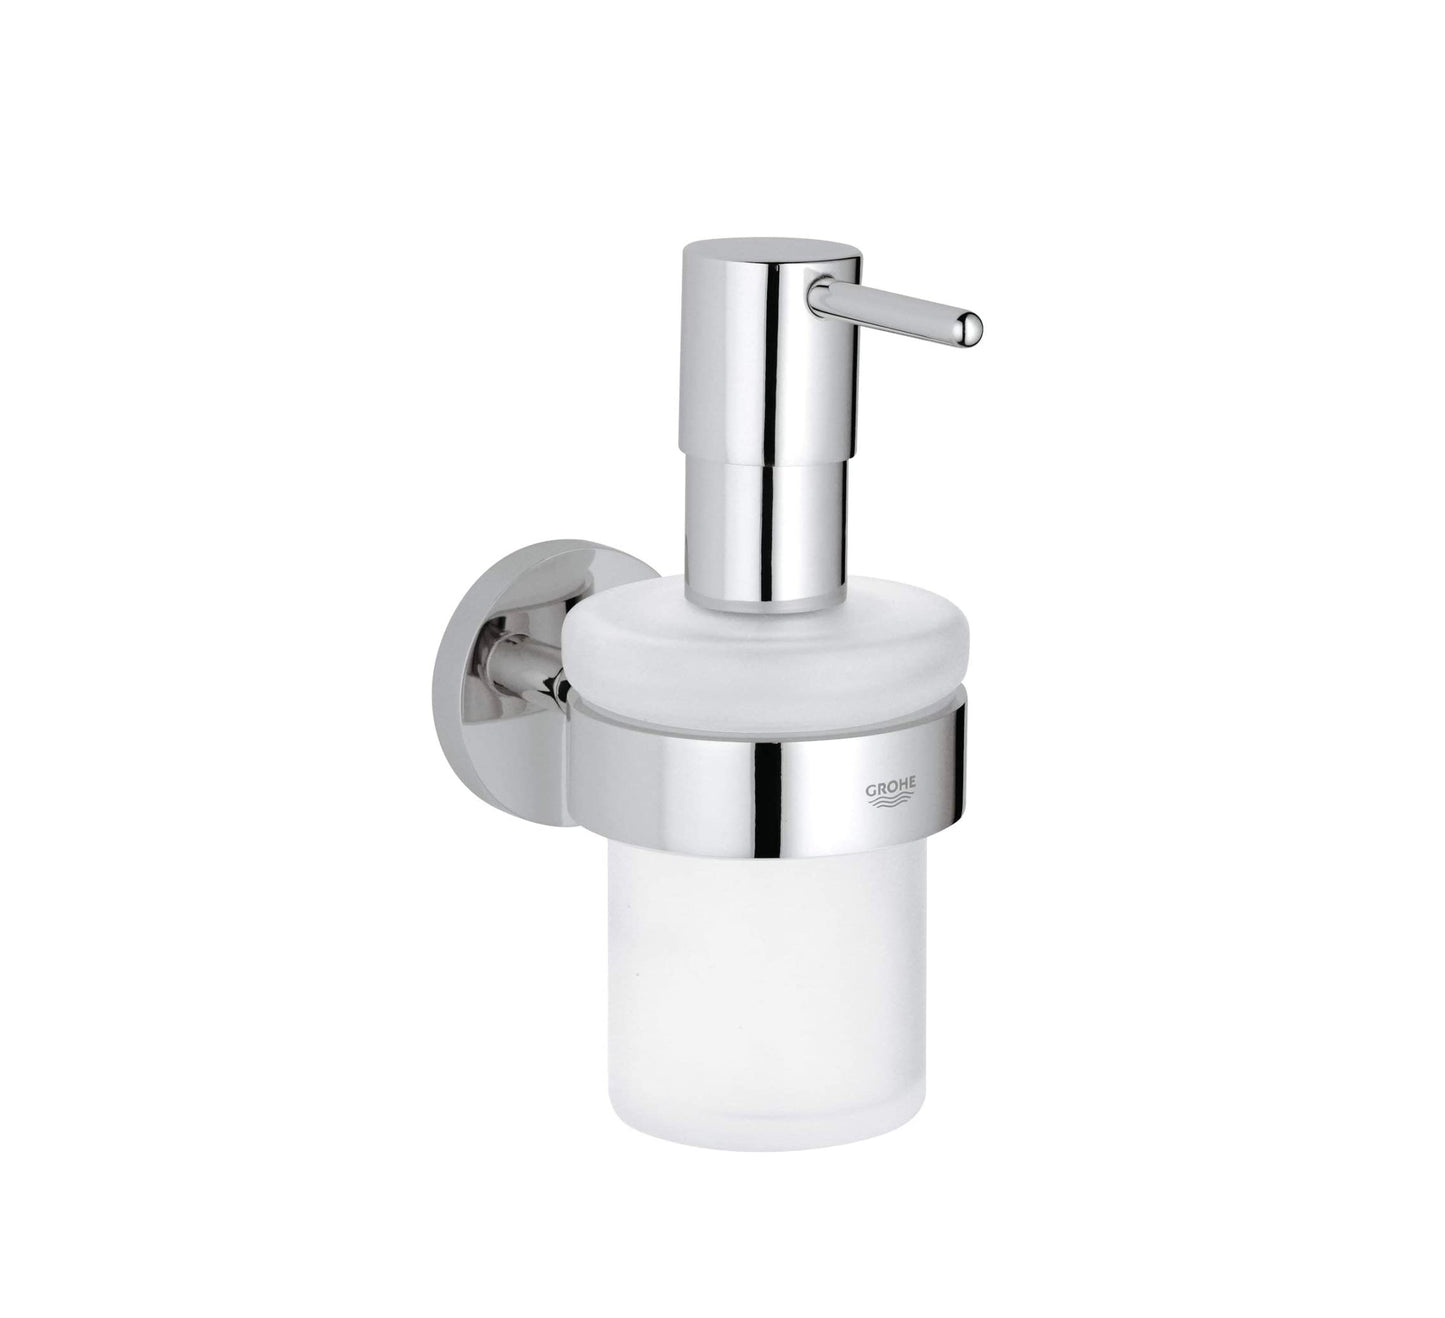 GROHE ESSENTIALS SOAP DISPENSER WITH HOLDER - 40448001